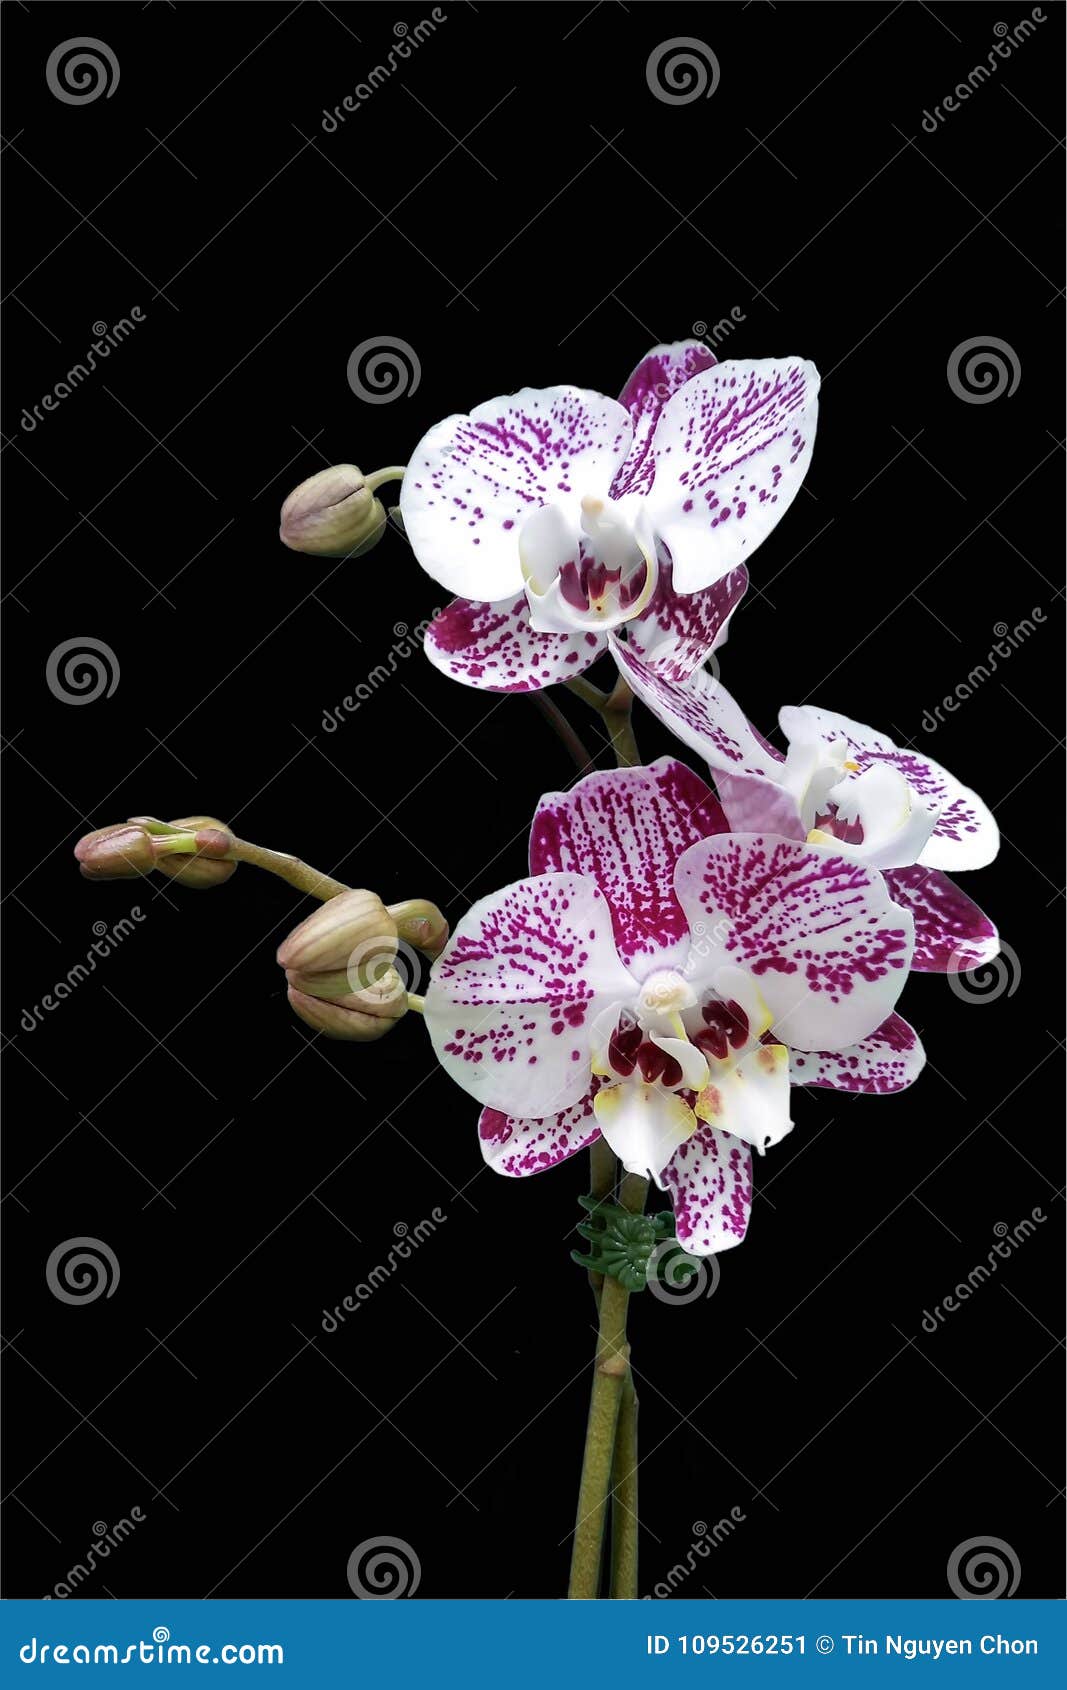 Doritaenopsis Orchid on Black Background Isolated Stock Image - Image of  isolated, branch: 109526251